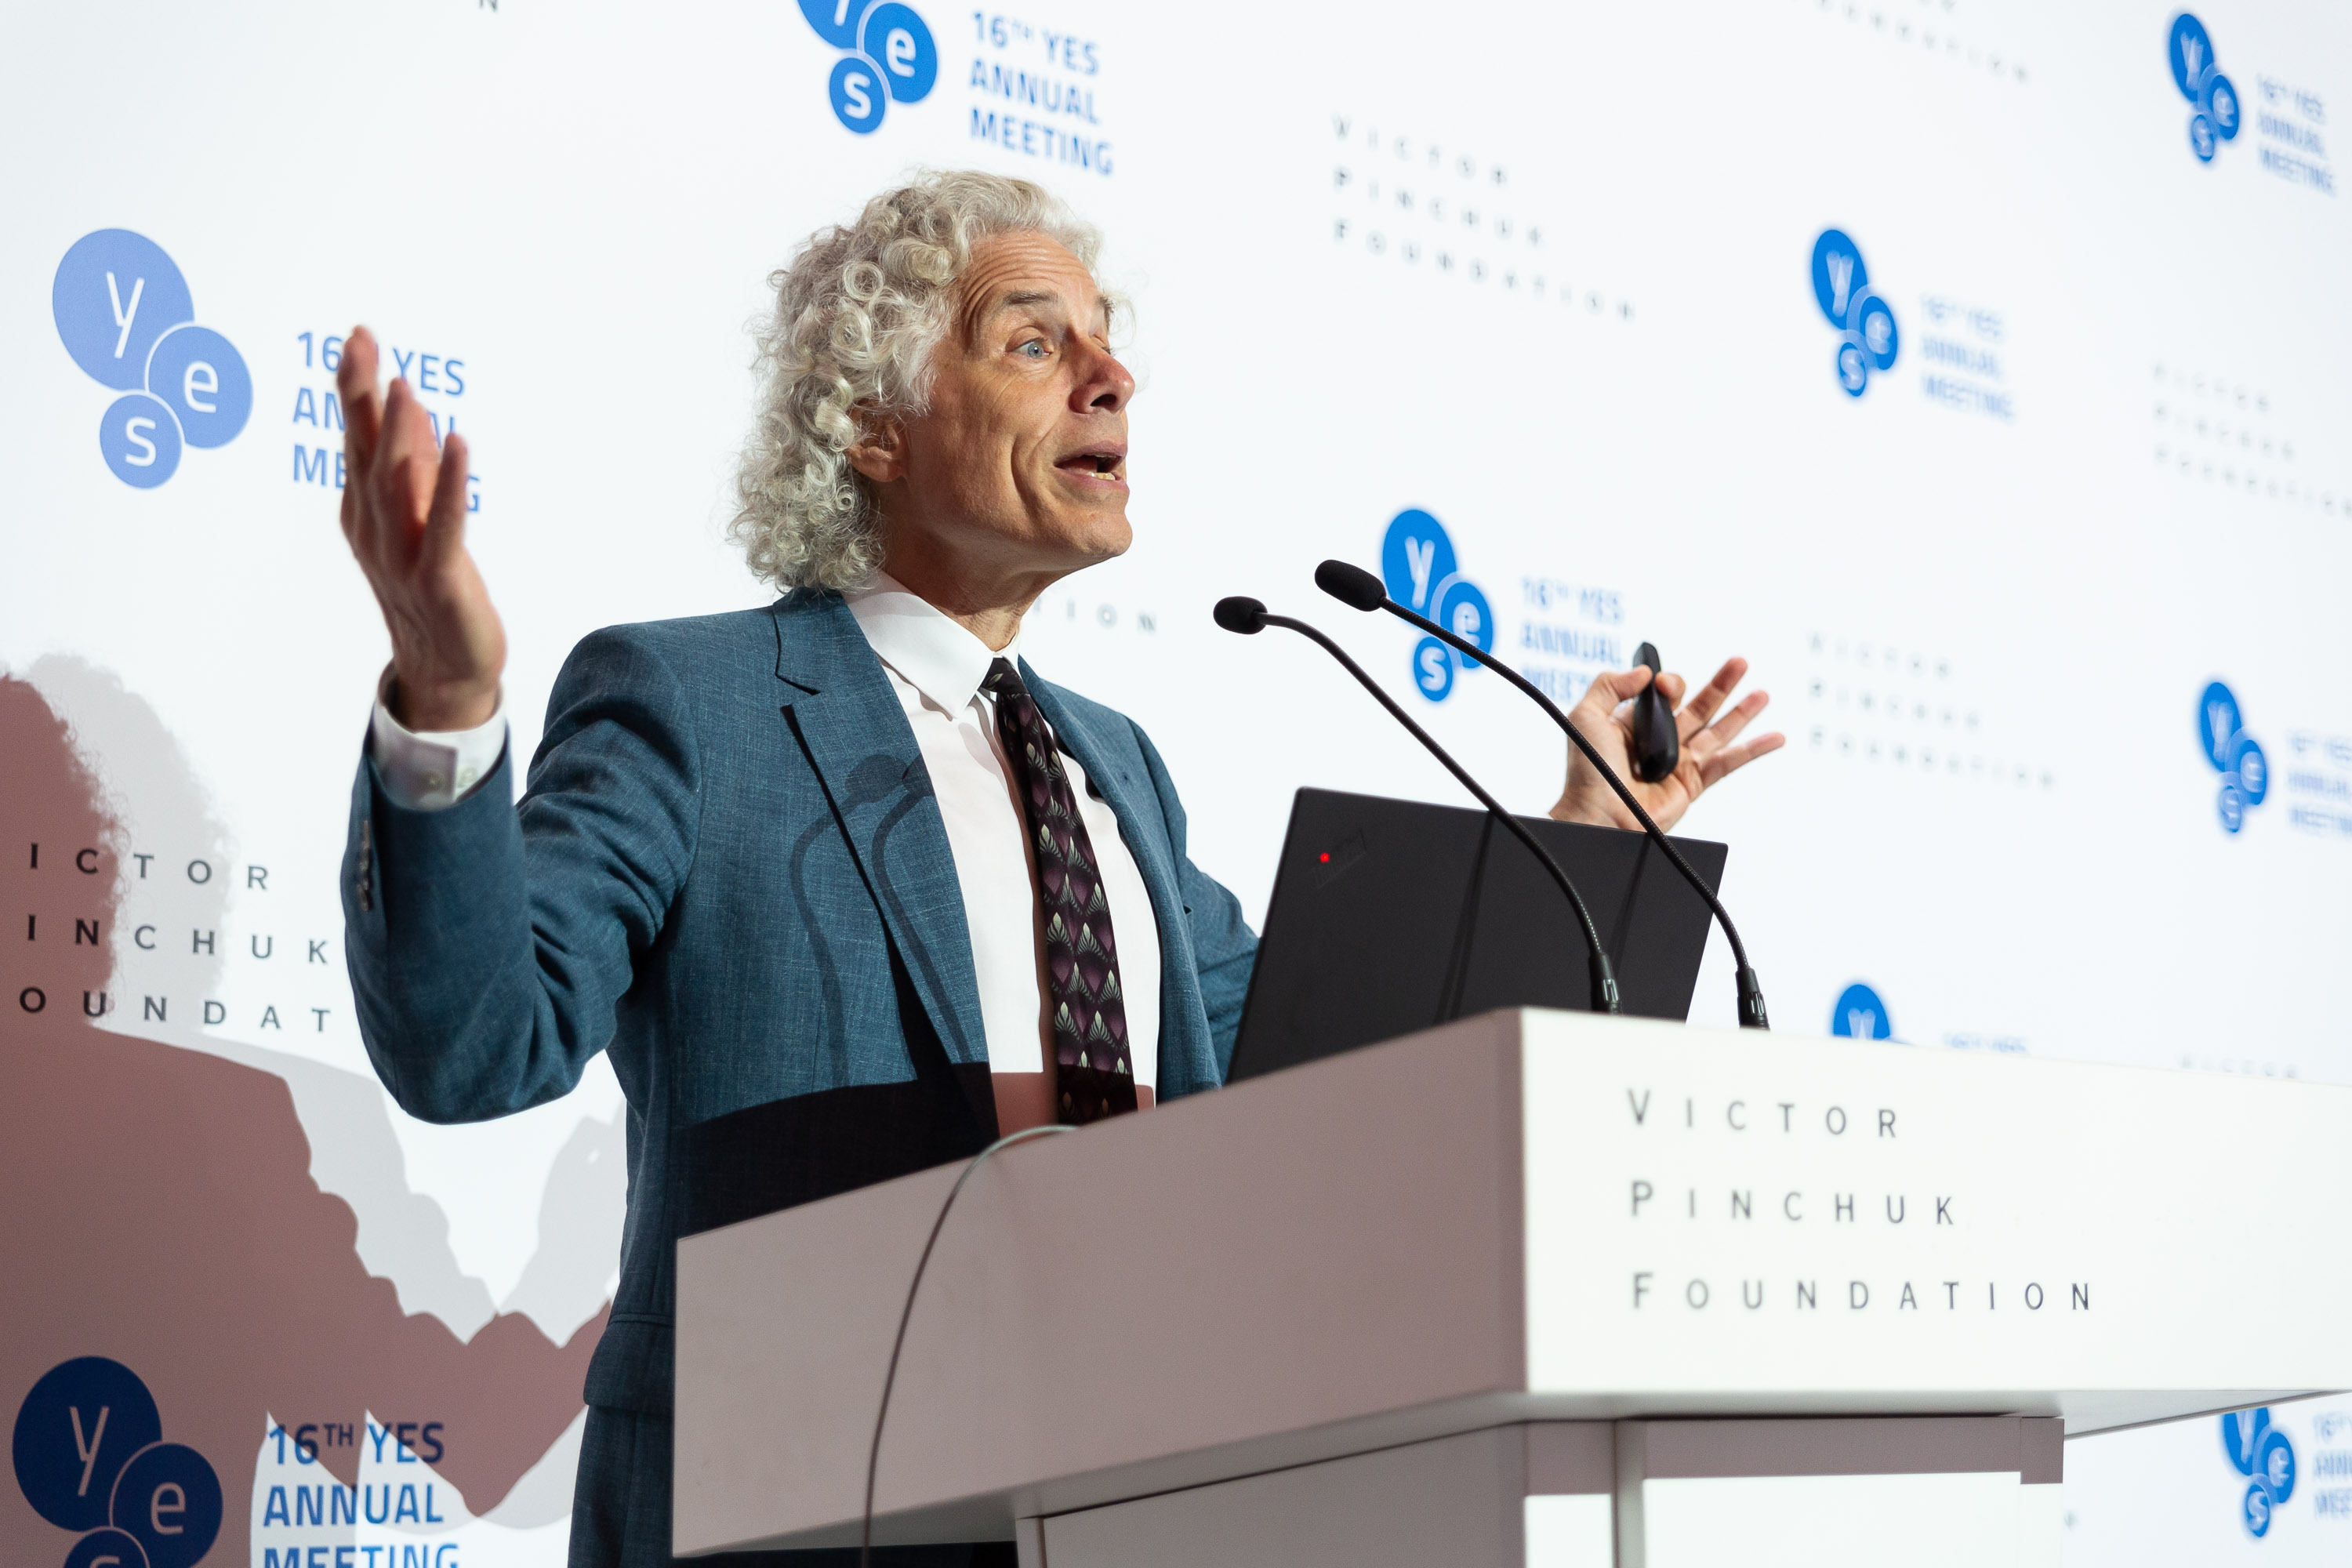 Public lecture “Is the world getting better or worse? A look at the numbers” by Steven Pinker, Johnstone Professor of Psychology, Harvard University